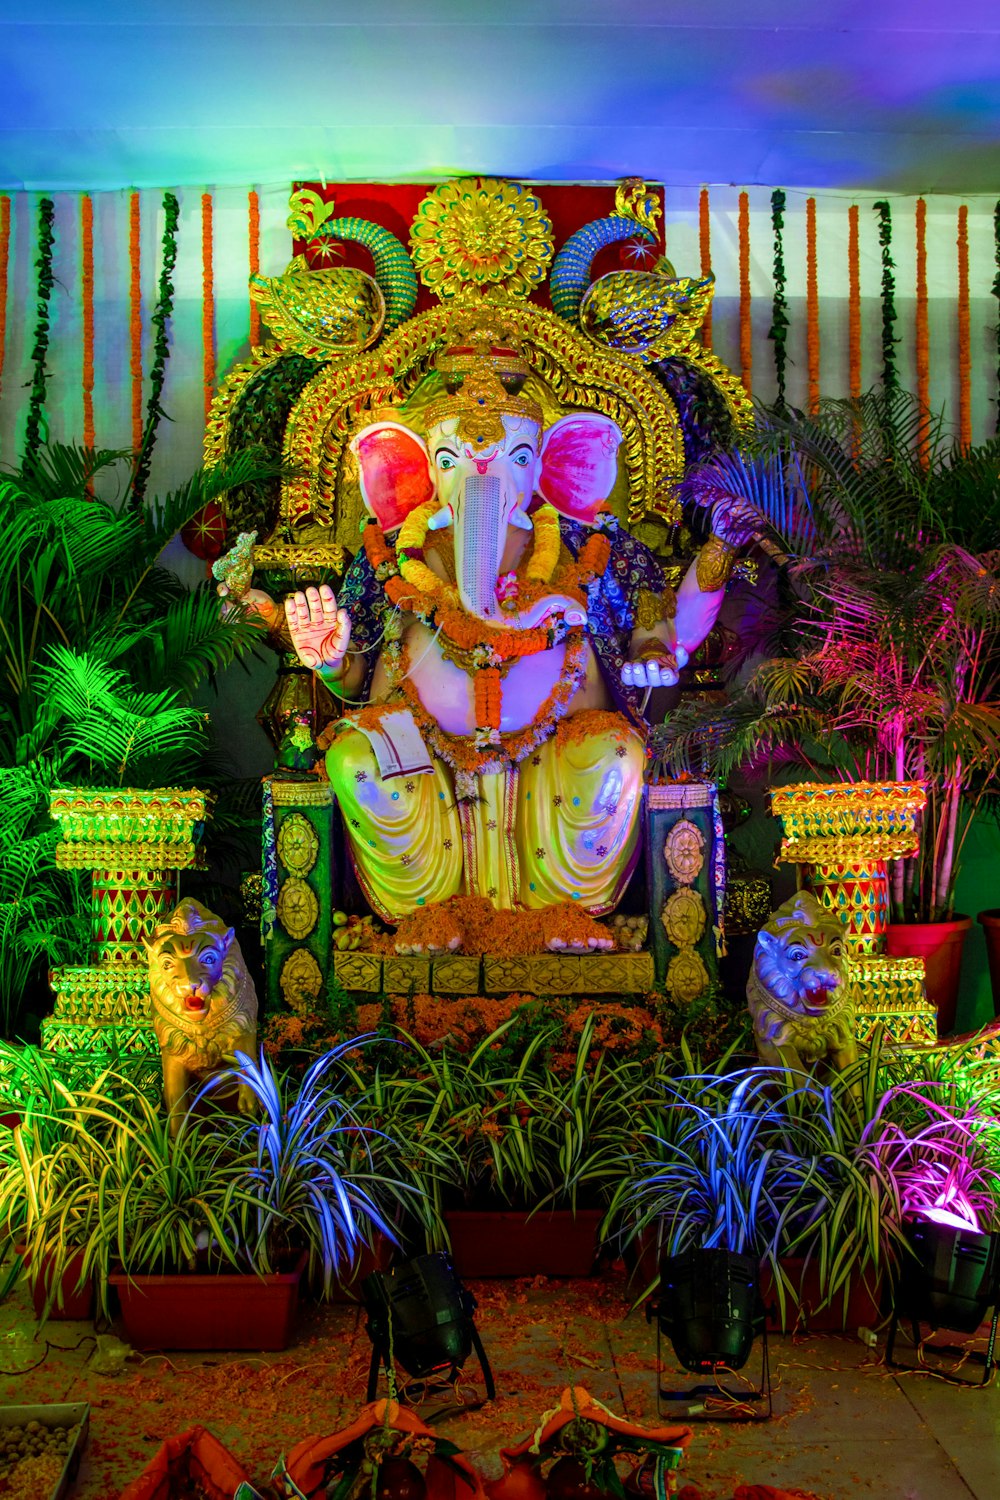 hindu deity statue surrounded by green plants